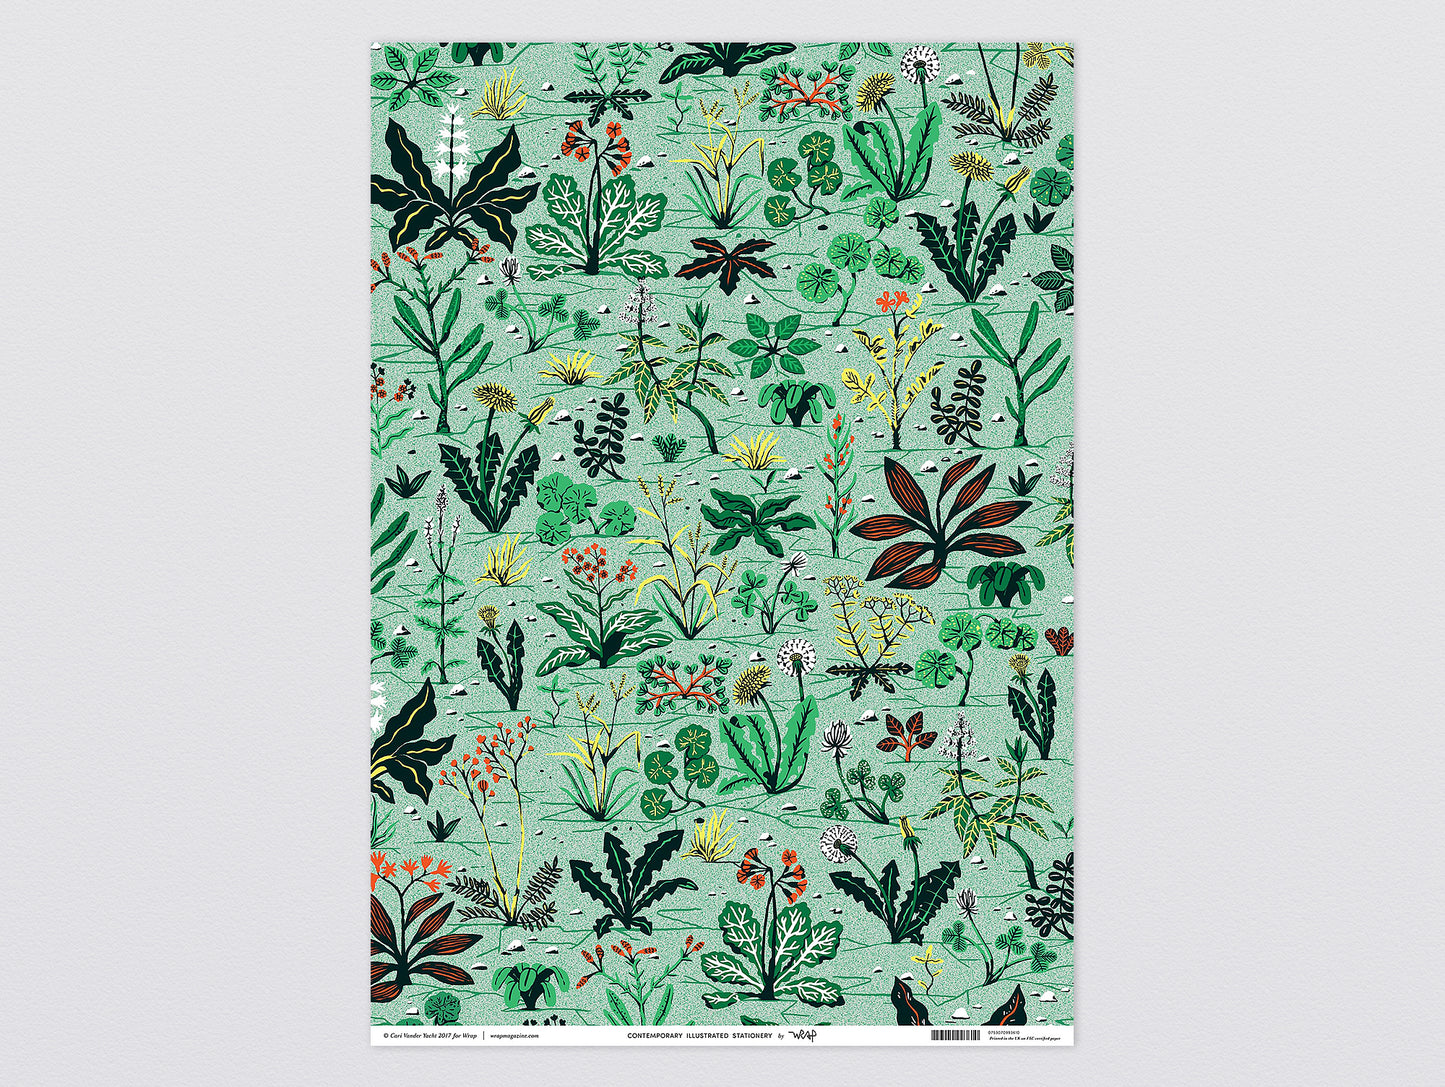 'Weeds' Wrapping Paper by Wrap